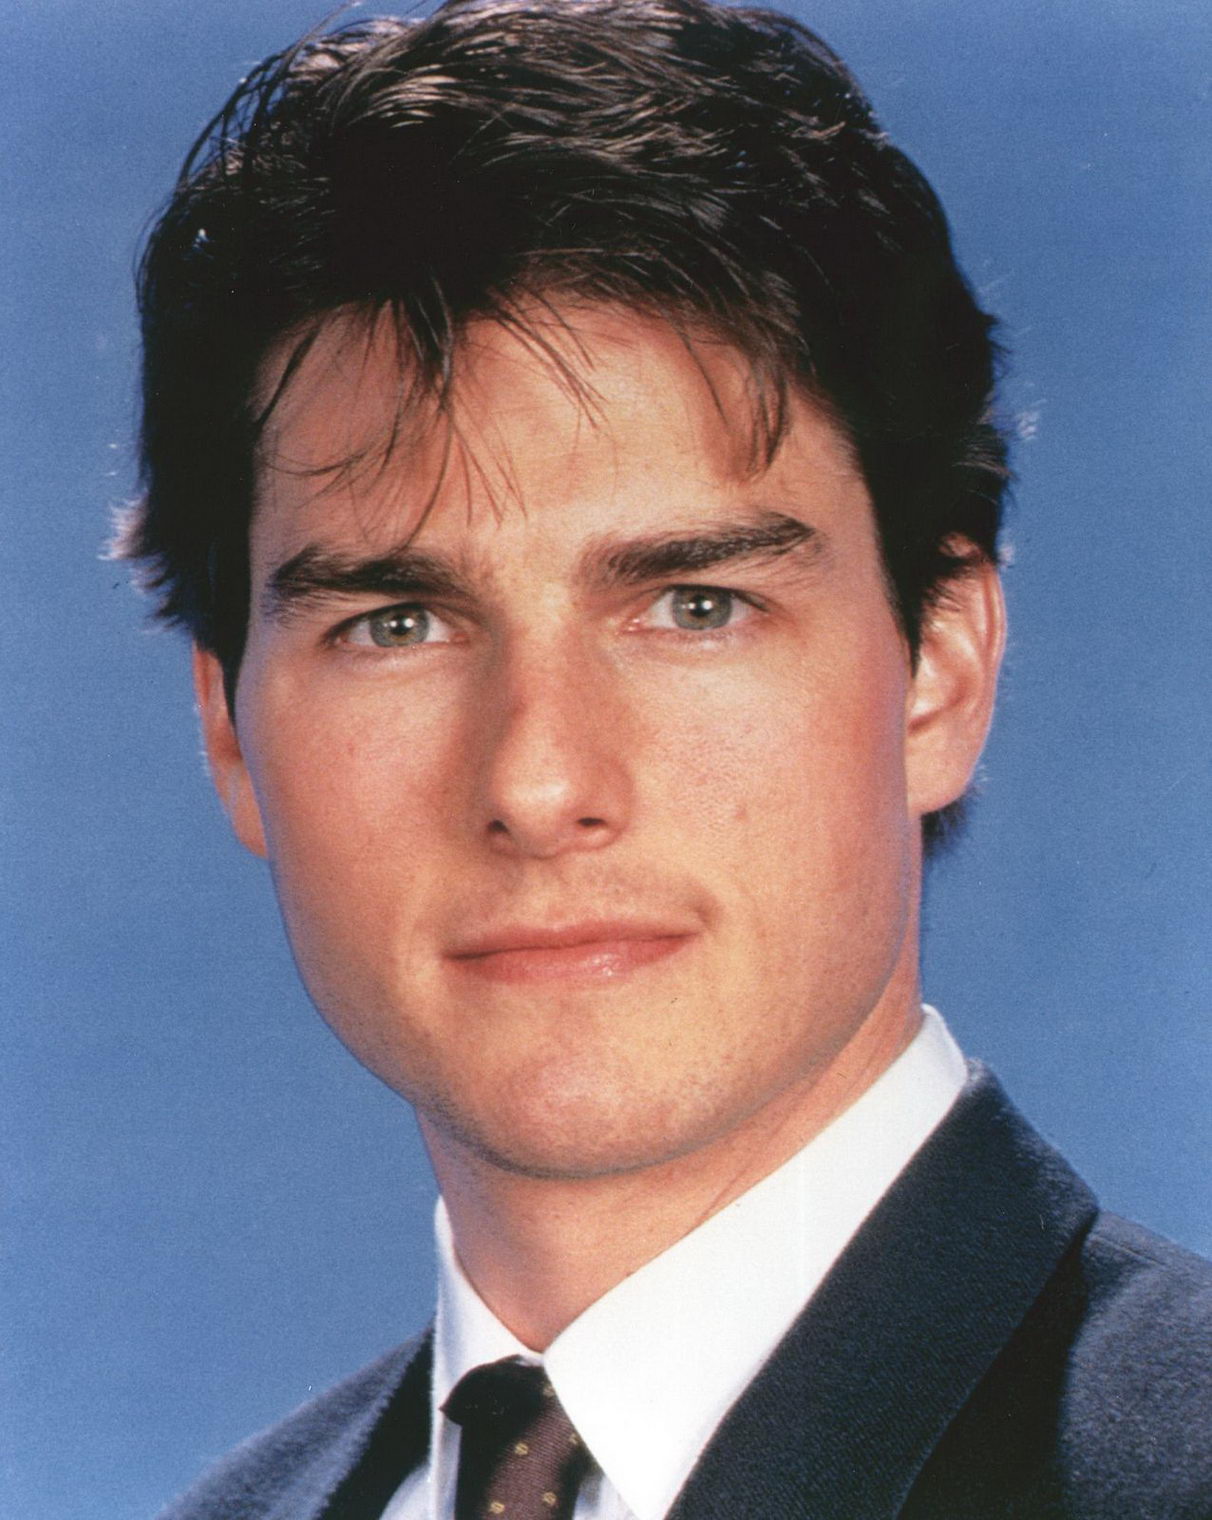 Hairstyles For Men Tom Cruise Hair The Sleek Appearance Of Tom Cruise